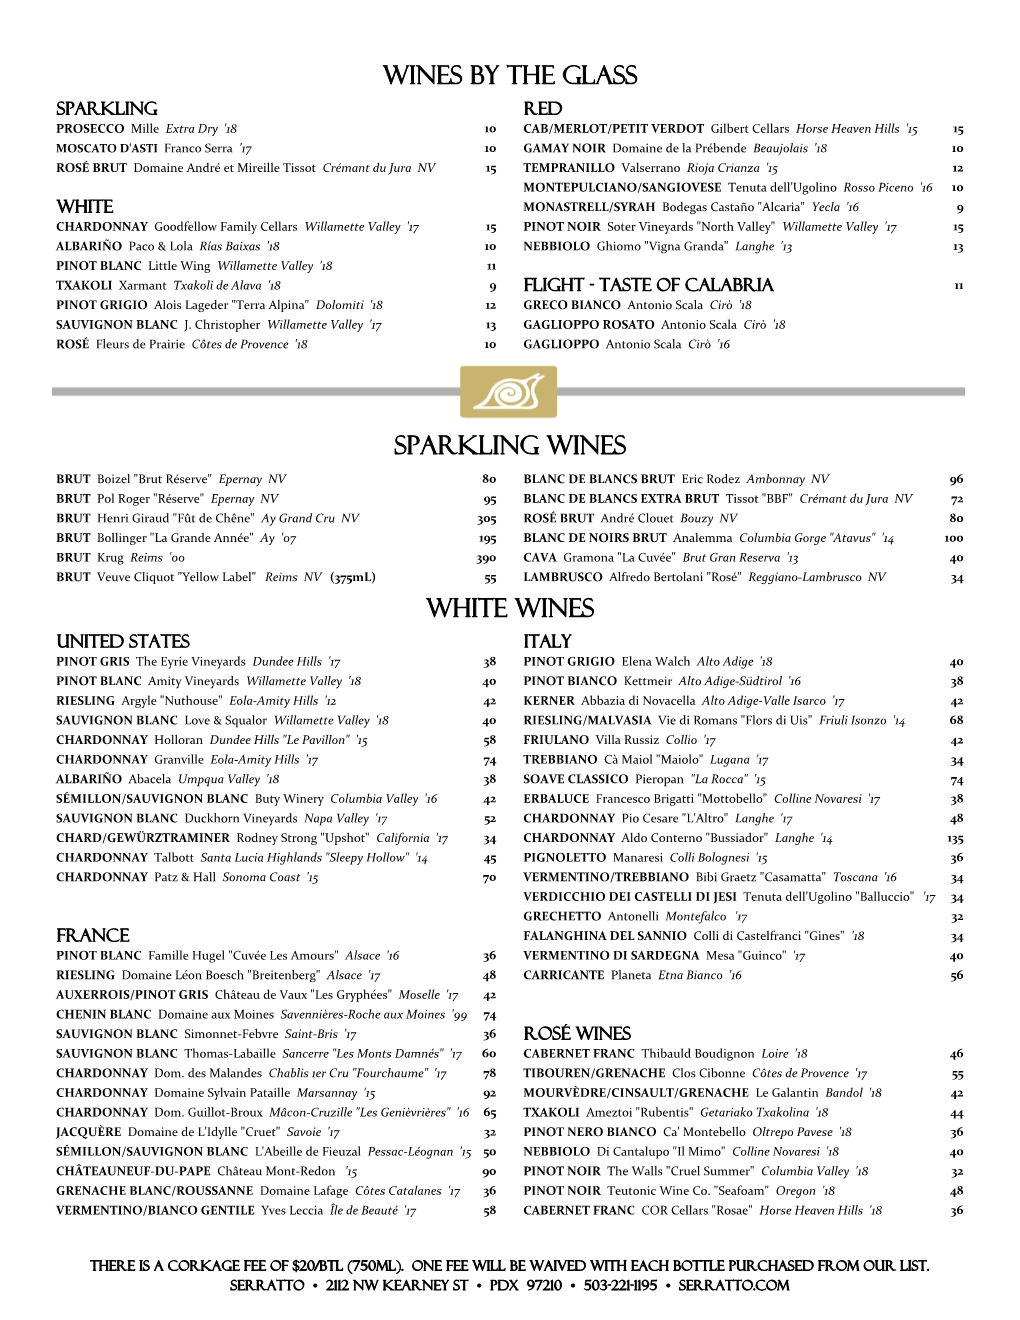 White Wines WINES by the GLASS Sparkling Wines